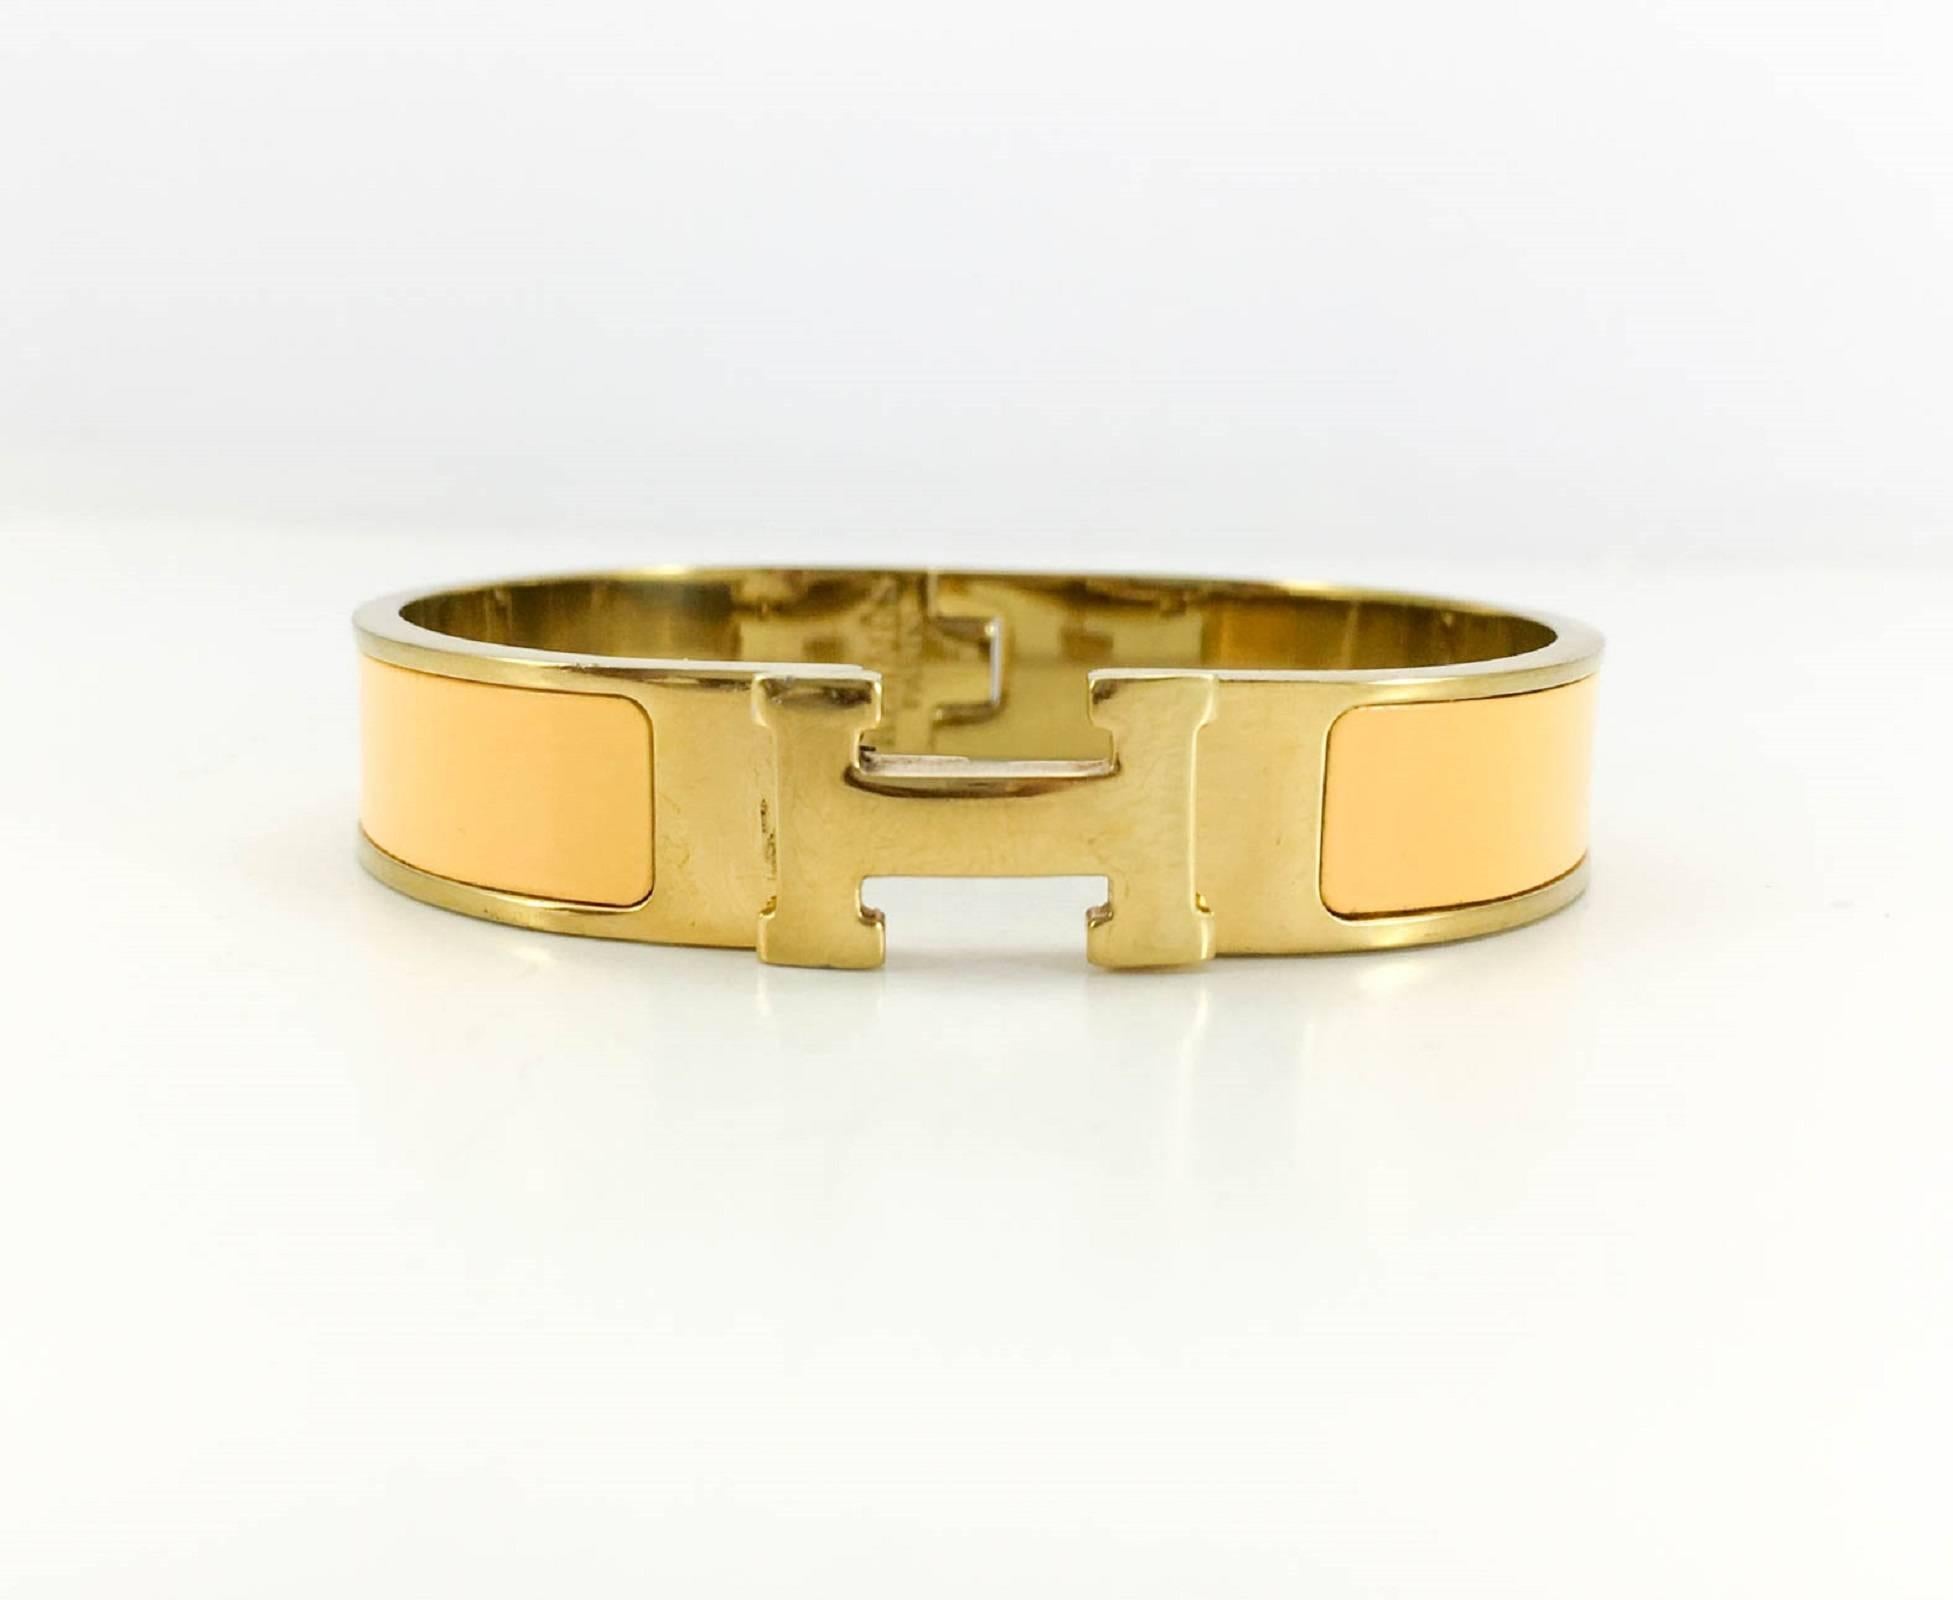 Hermes Clic Clac H Yellow and Gold Tone Bracelet. This very chic and elegant bracelet by Hermes features gilt hardware and yellow enamel. The clic clac clasp is in the shape of the Hermes iconic ‘H’. Understated and yet striking, this bracelet is